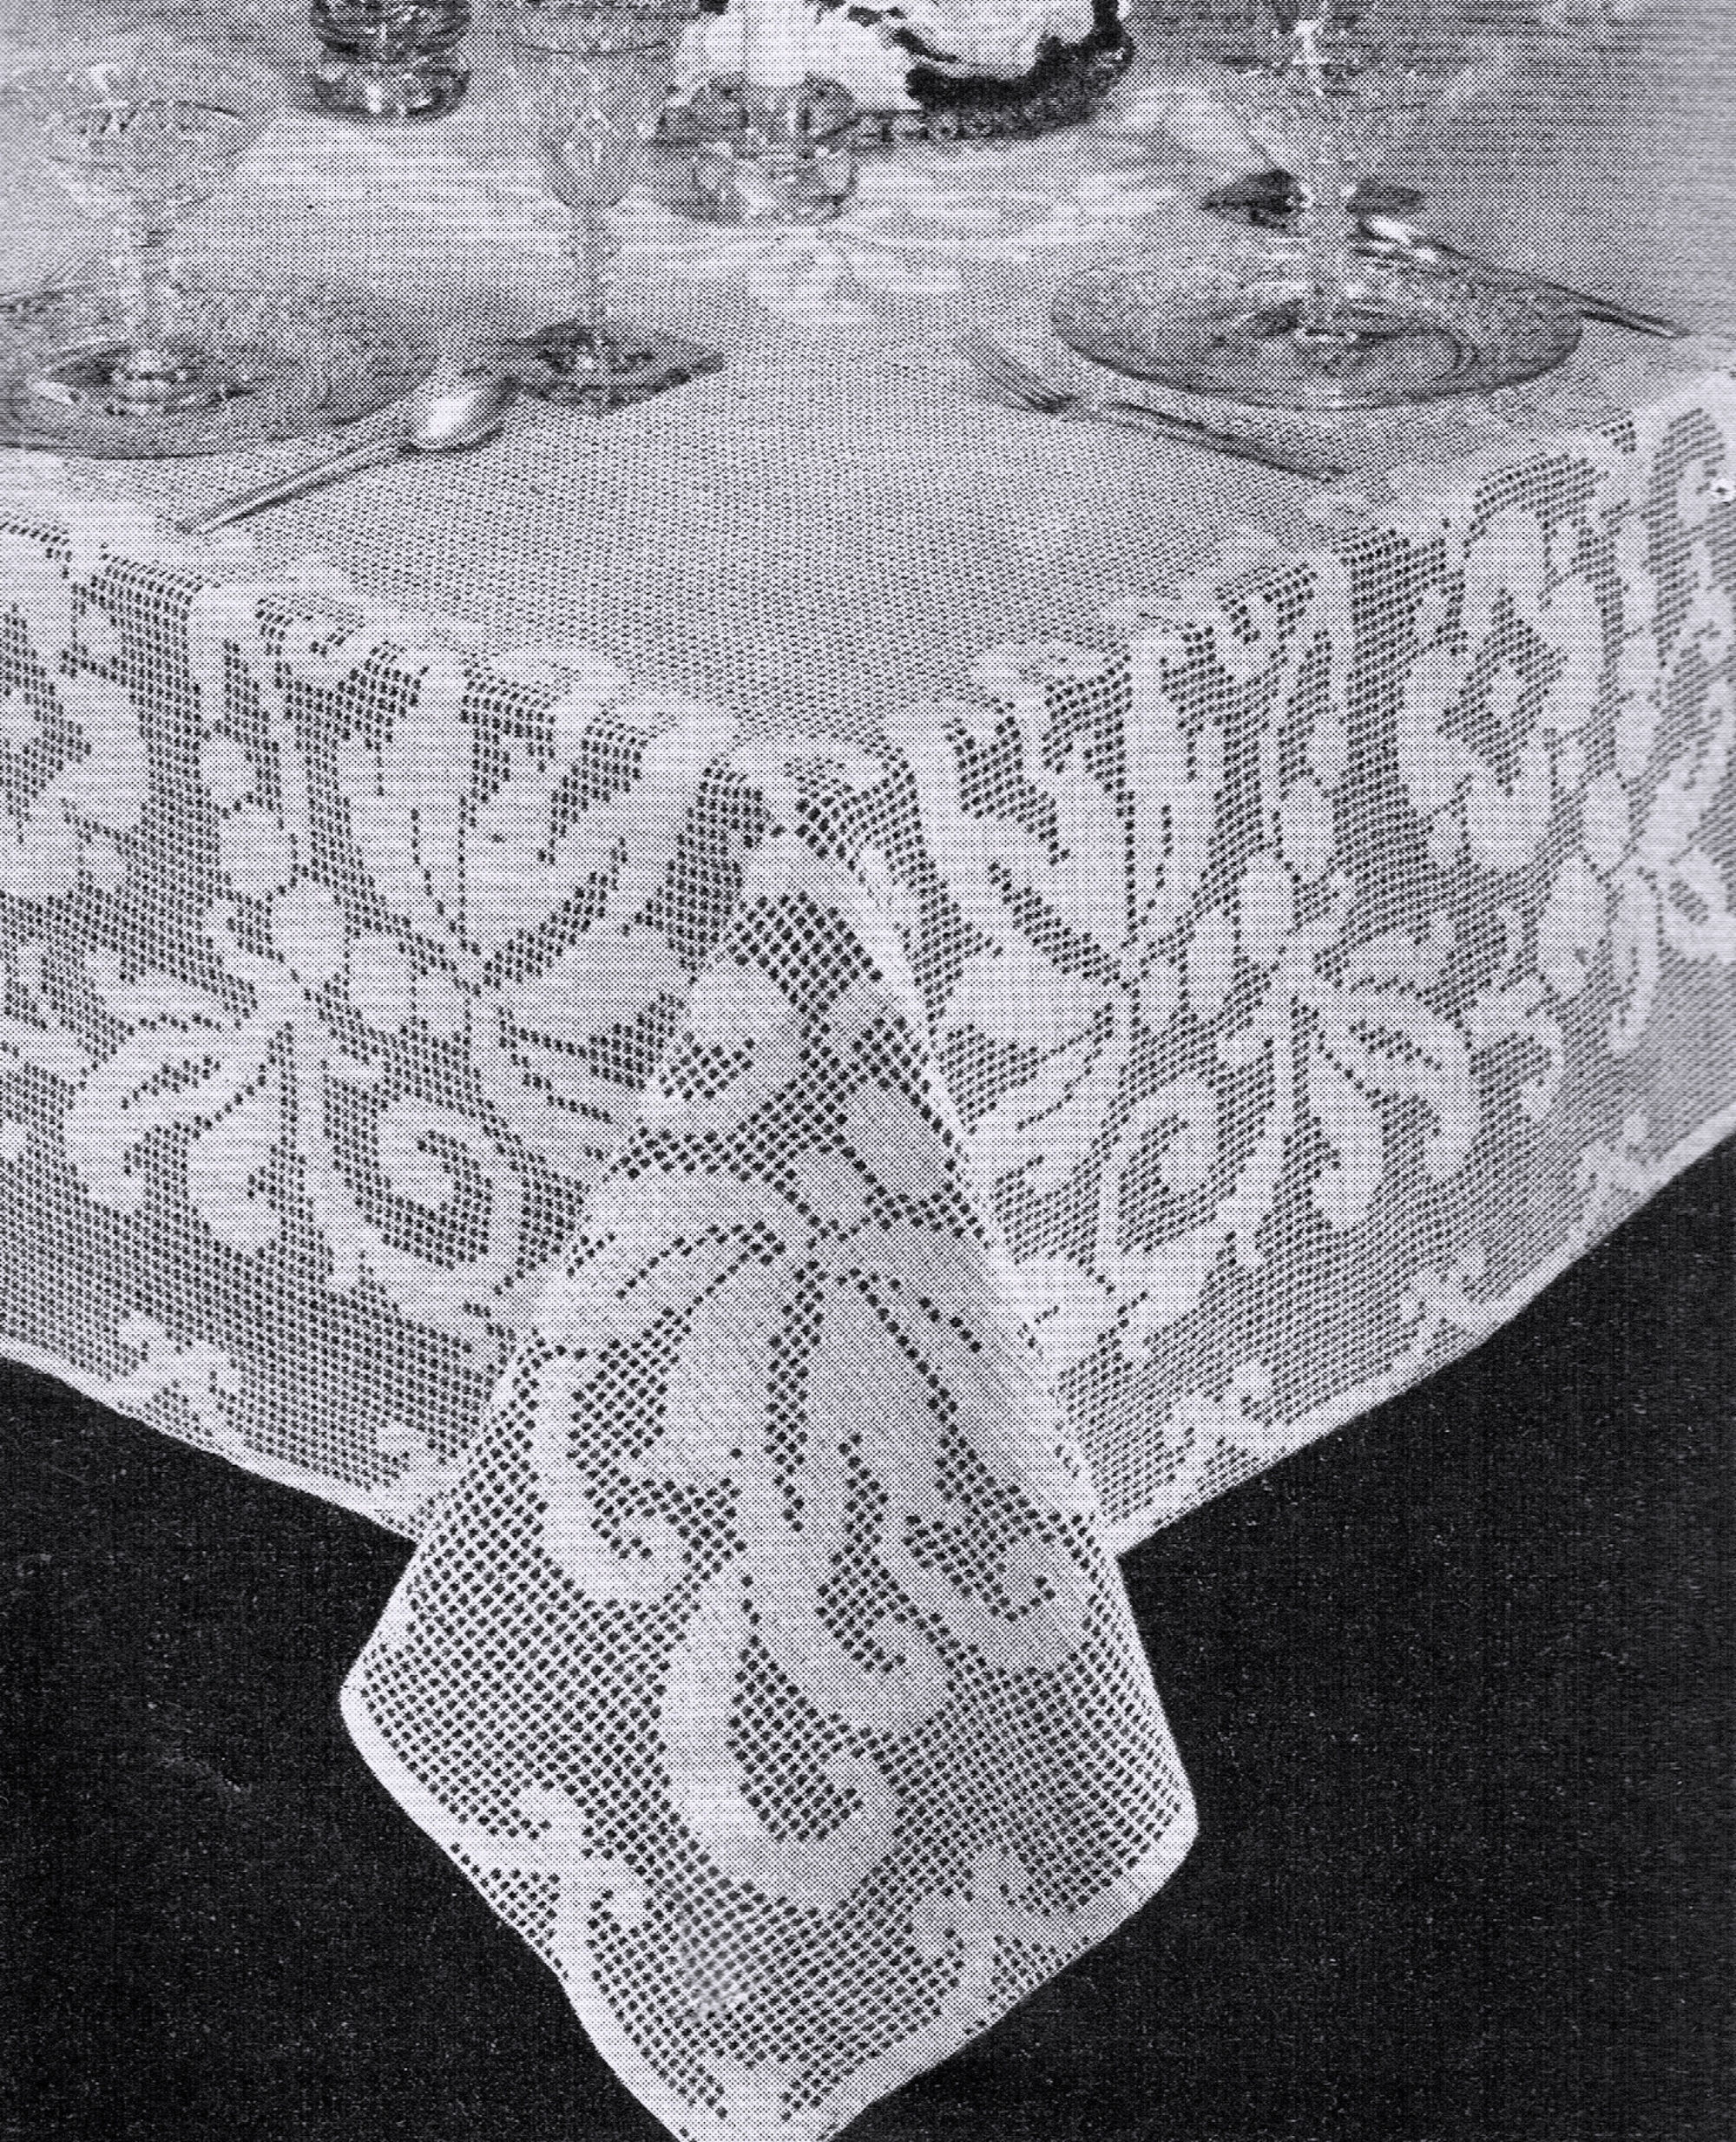 1175 Antique Vintage TABLECLOTH Pattern to Crochet Reproduction 52" 